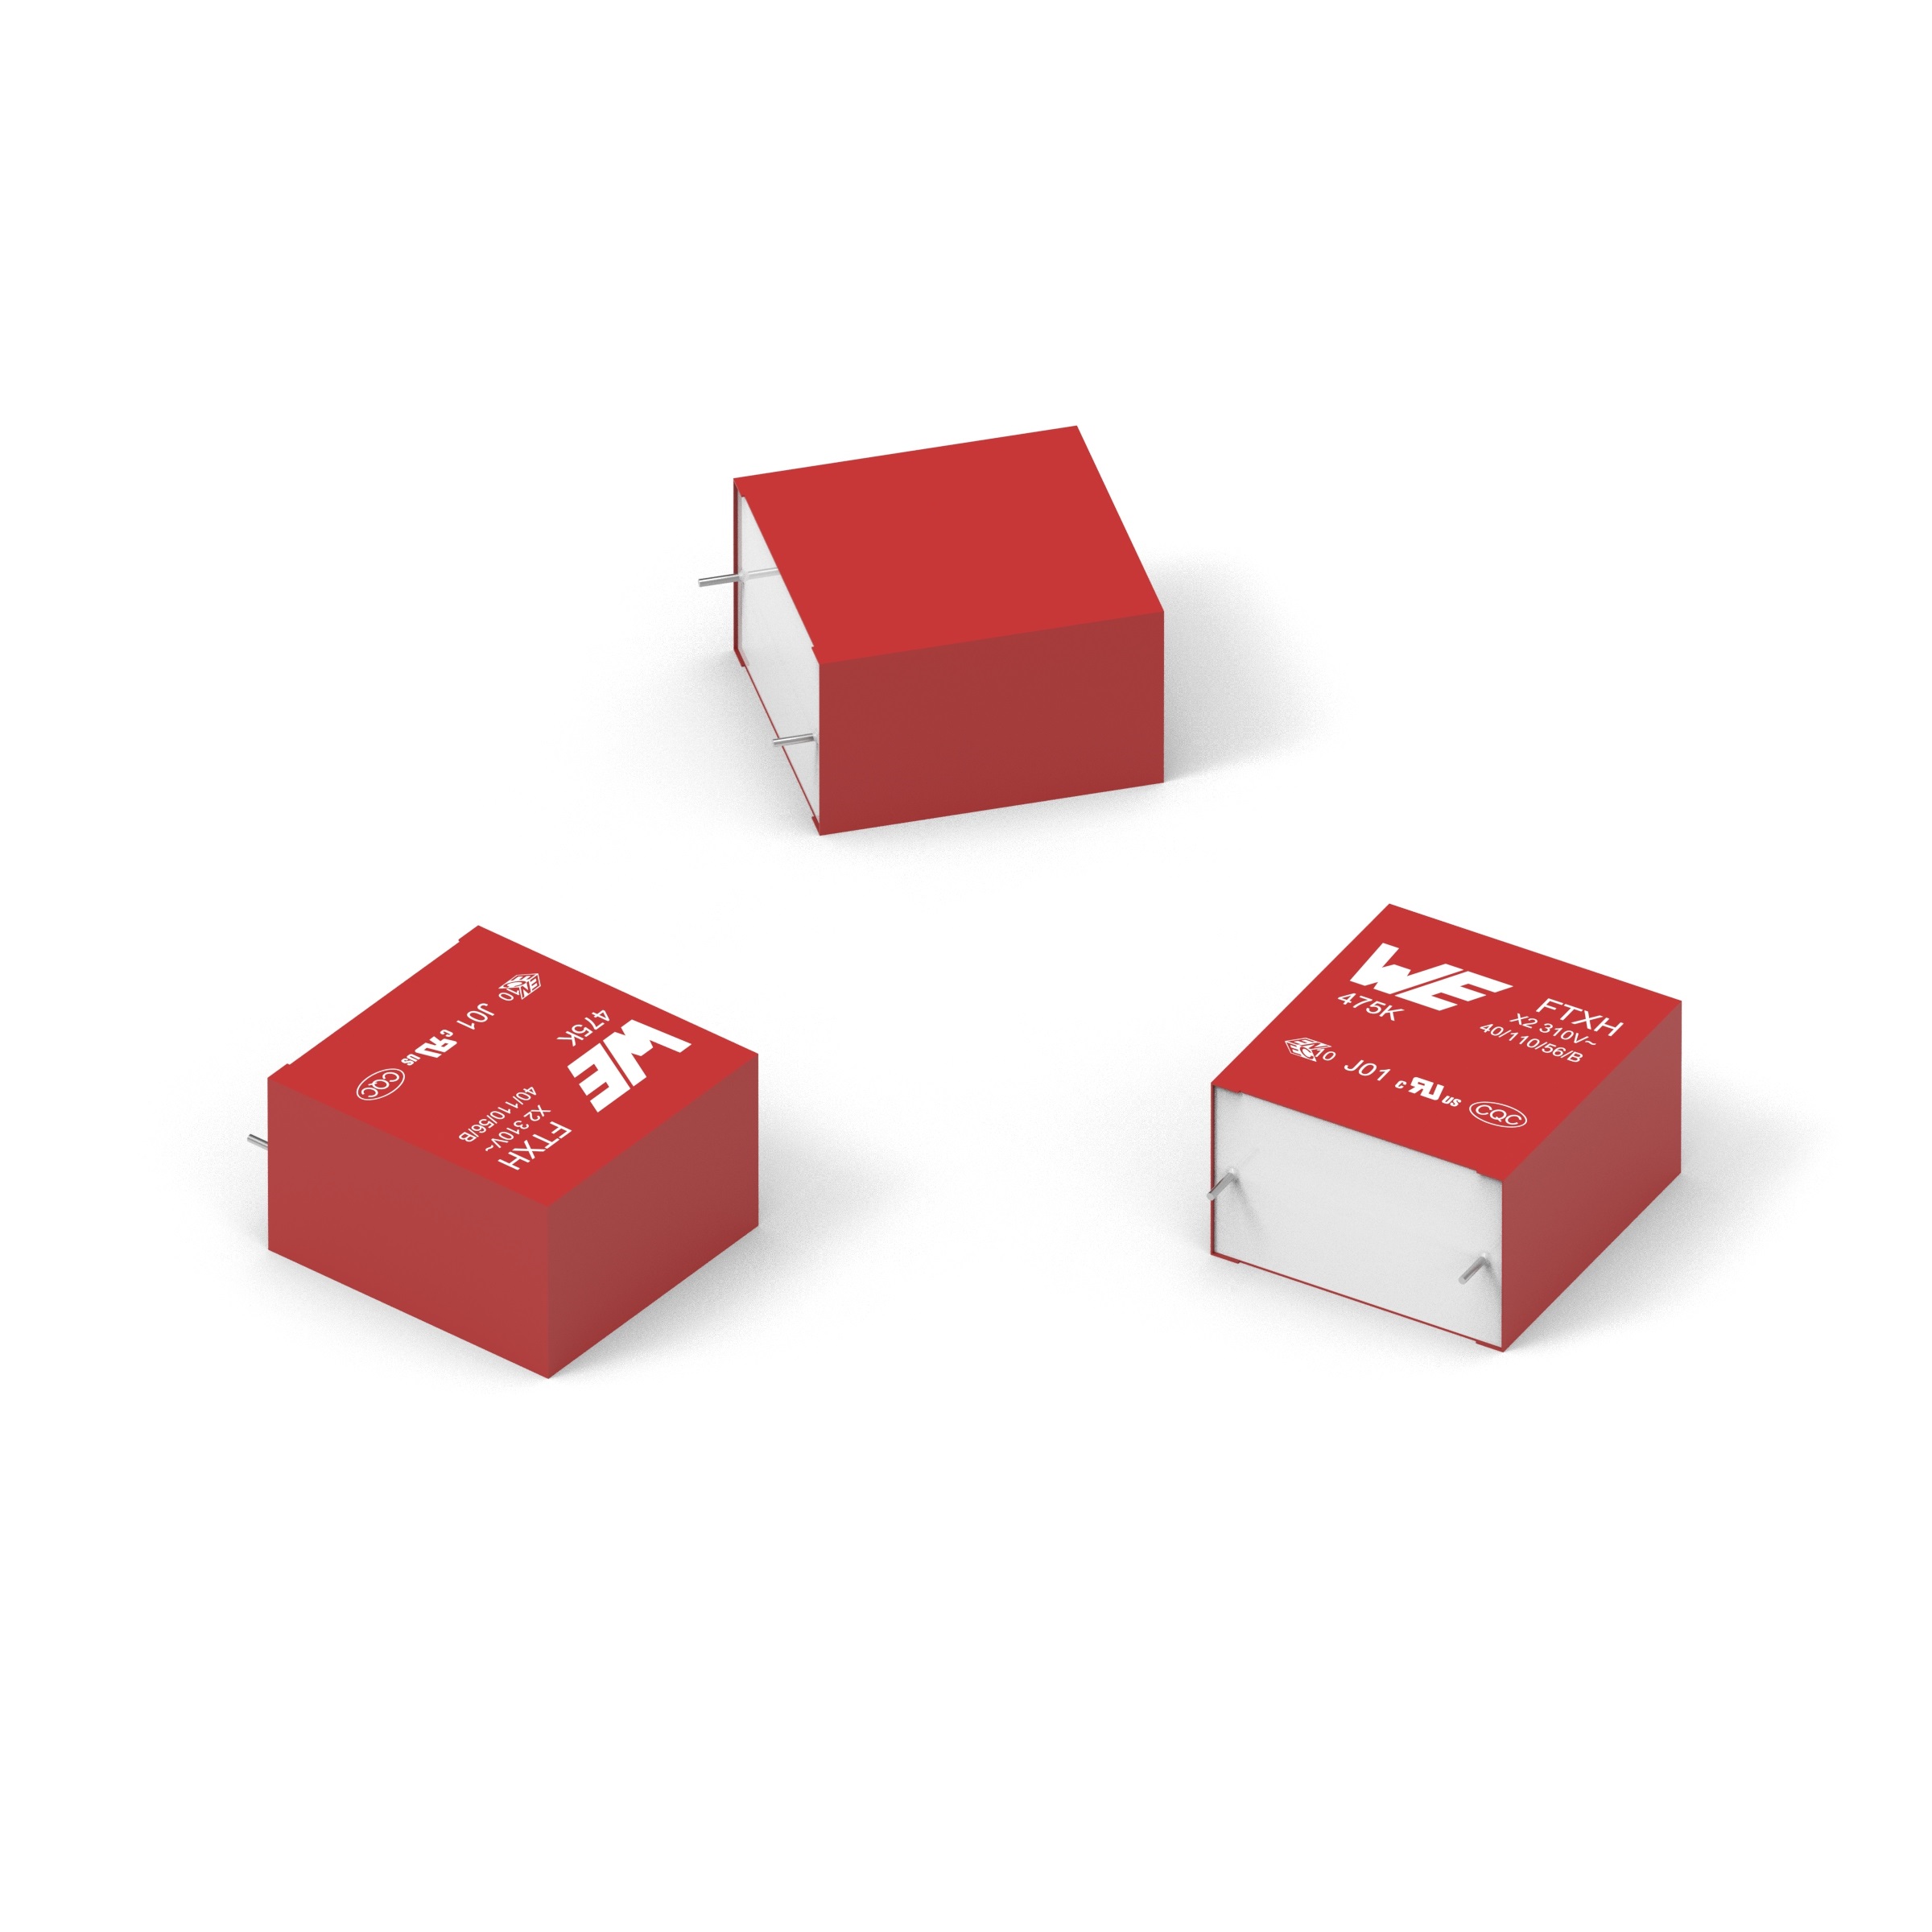 Würth Elektronik introduces its new family of safety capacitors